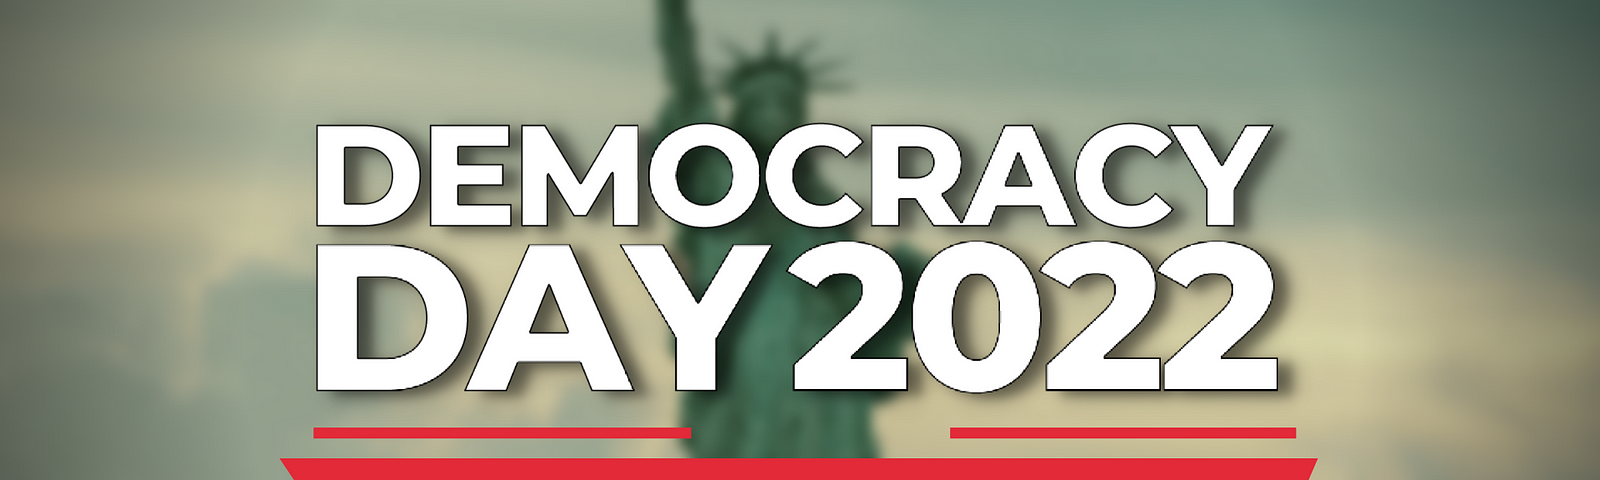 The Democracy Day 2022 logo against a blurry photo of the Statue of Liberty in the background.